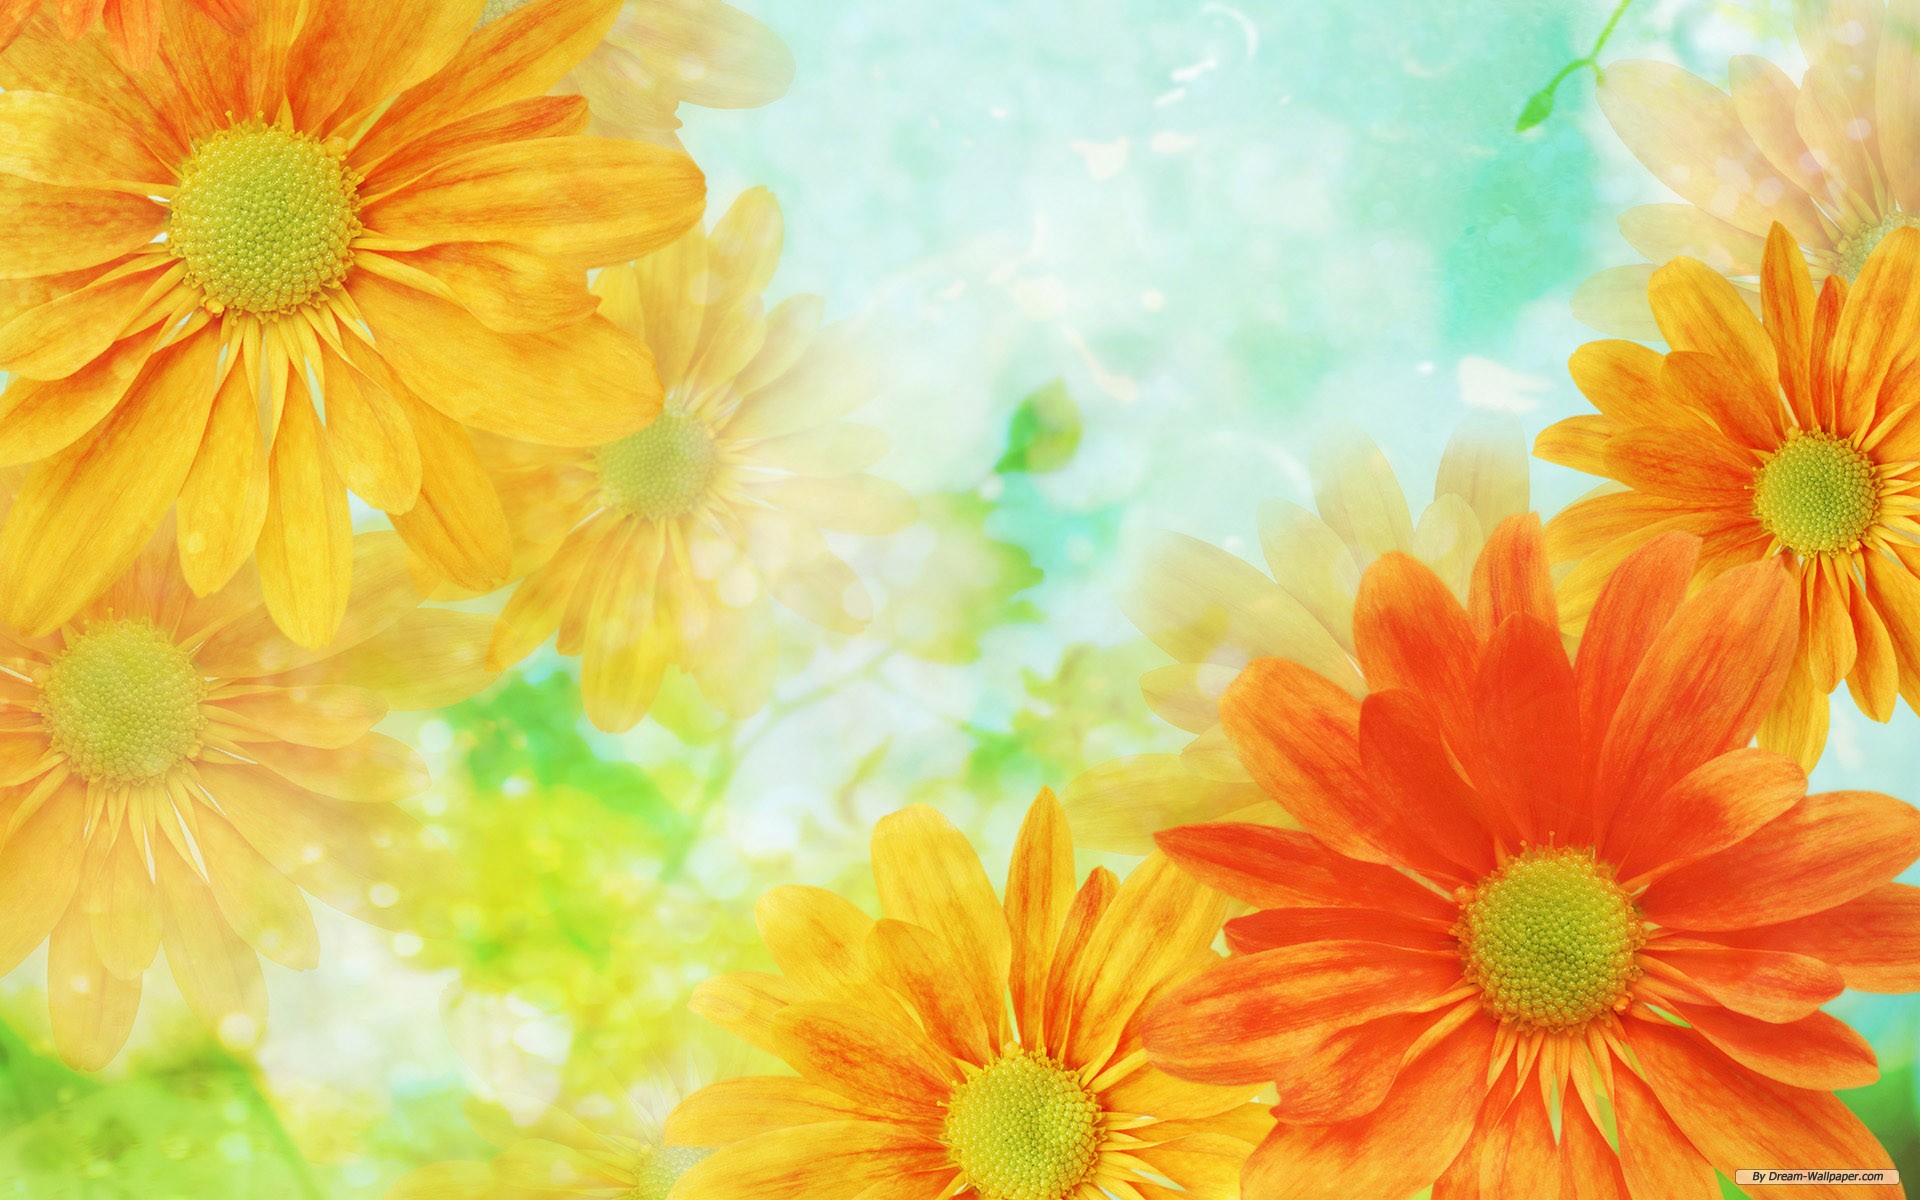 75+] Images Of Flower Backgrounds - WallpaperSafari